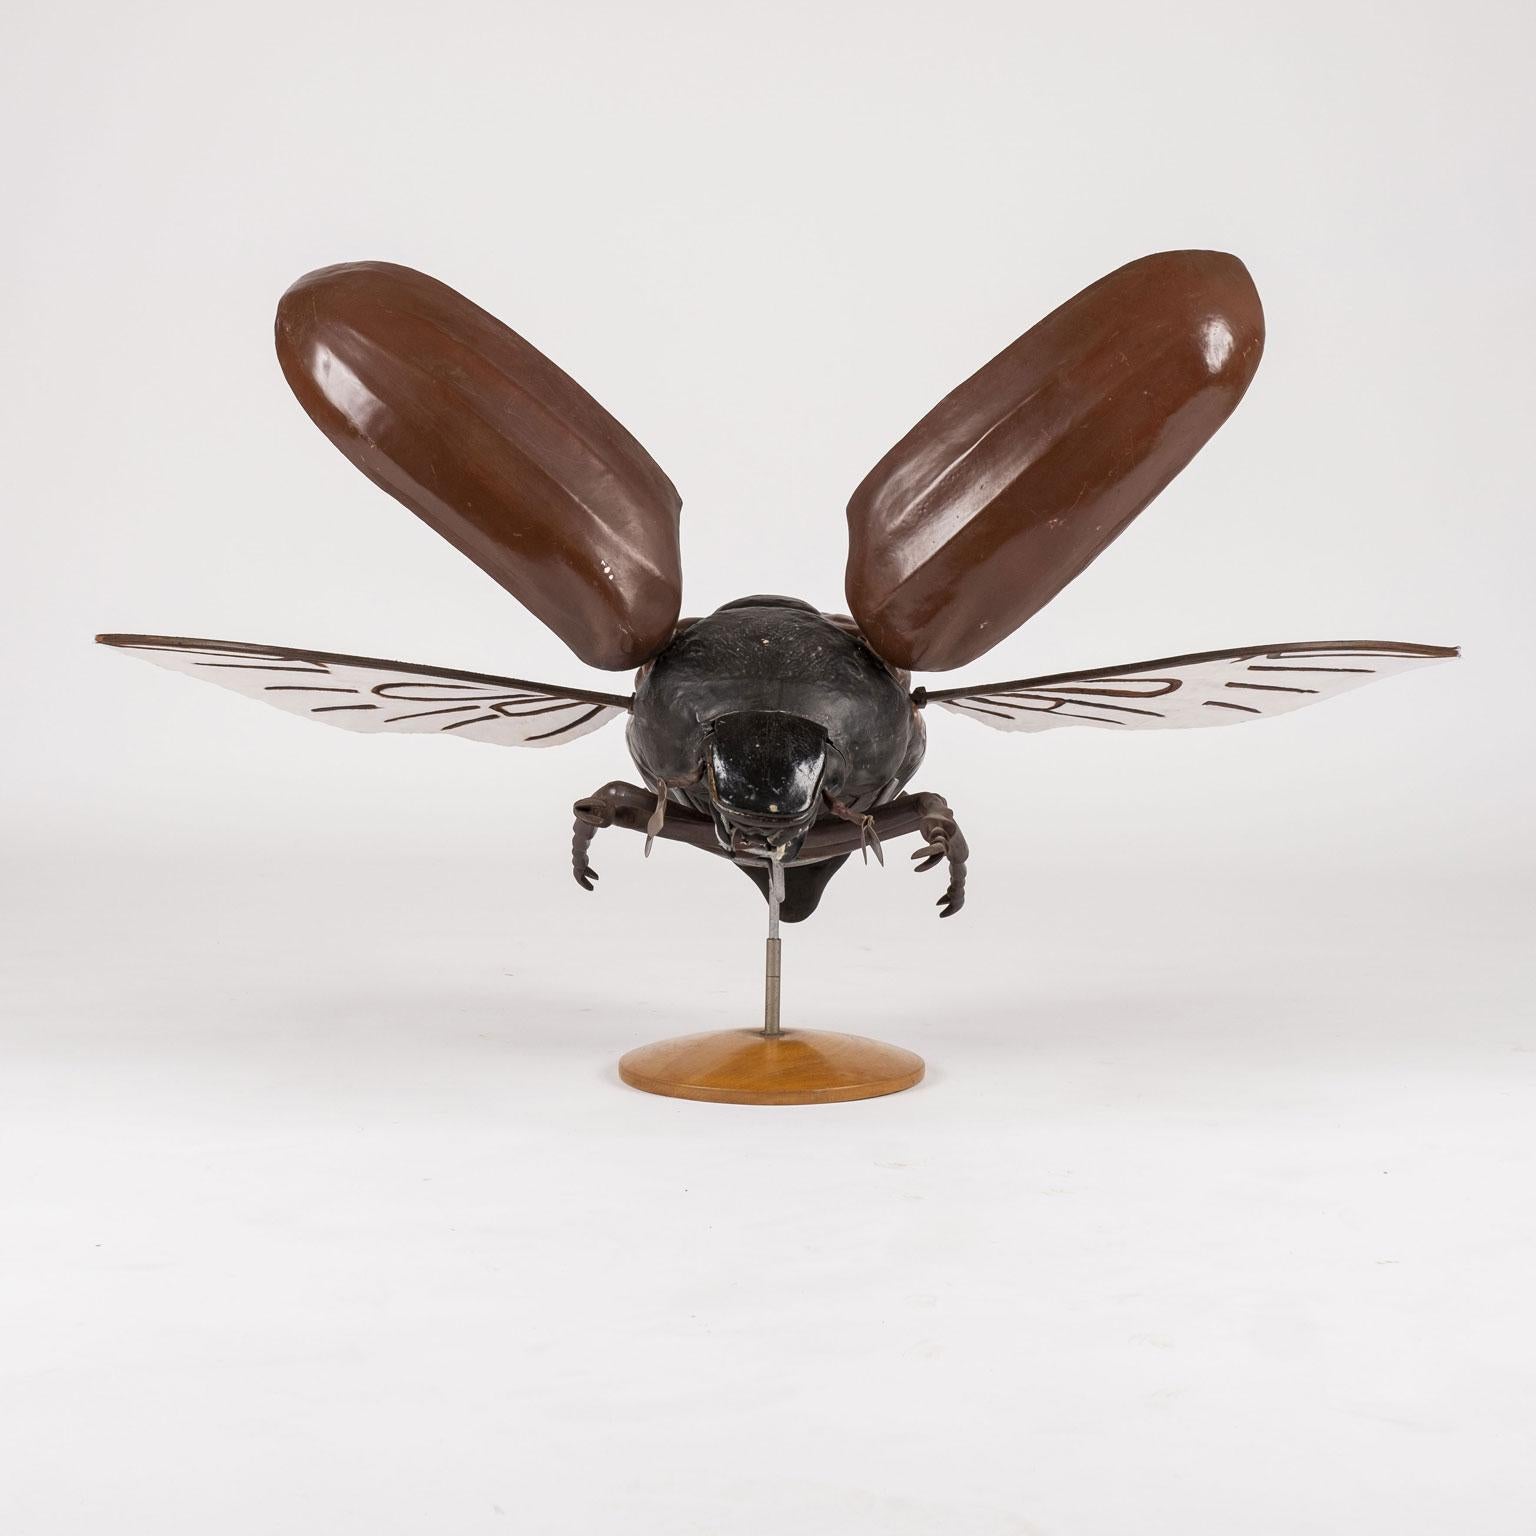 Mid-20th Century Large Sculpture of Beetle in Flight